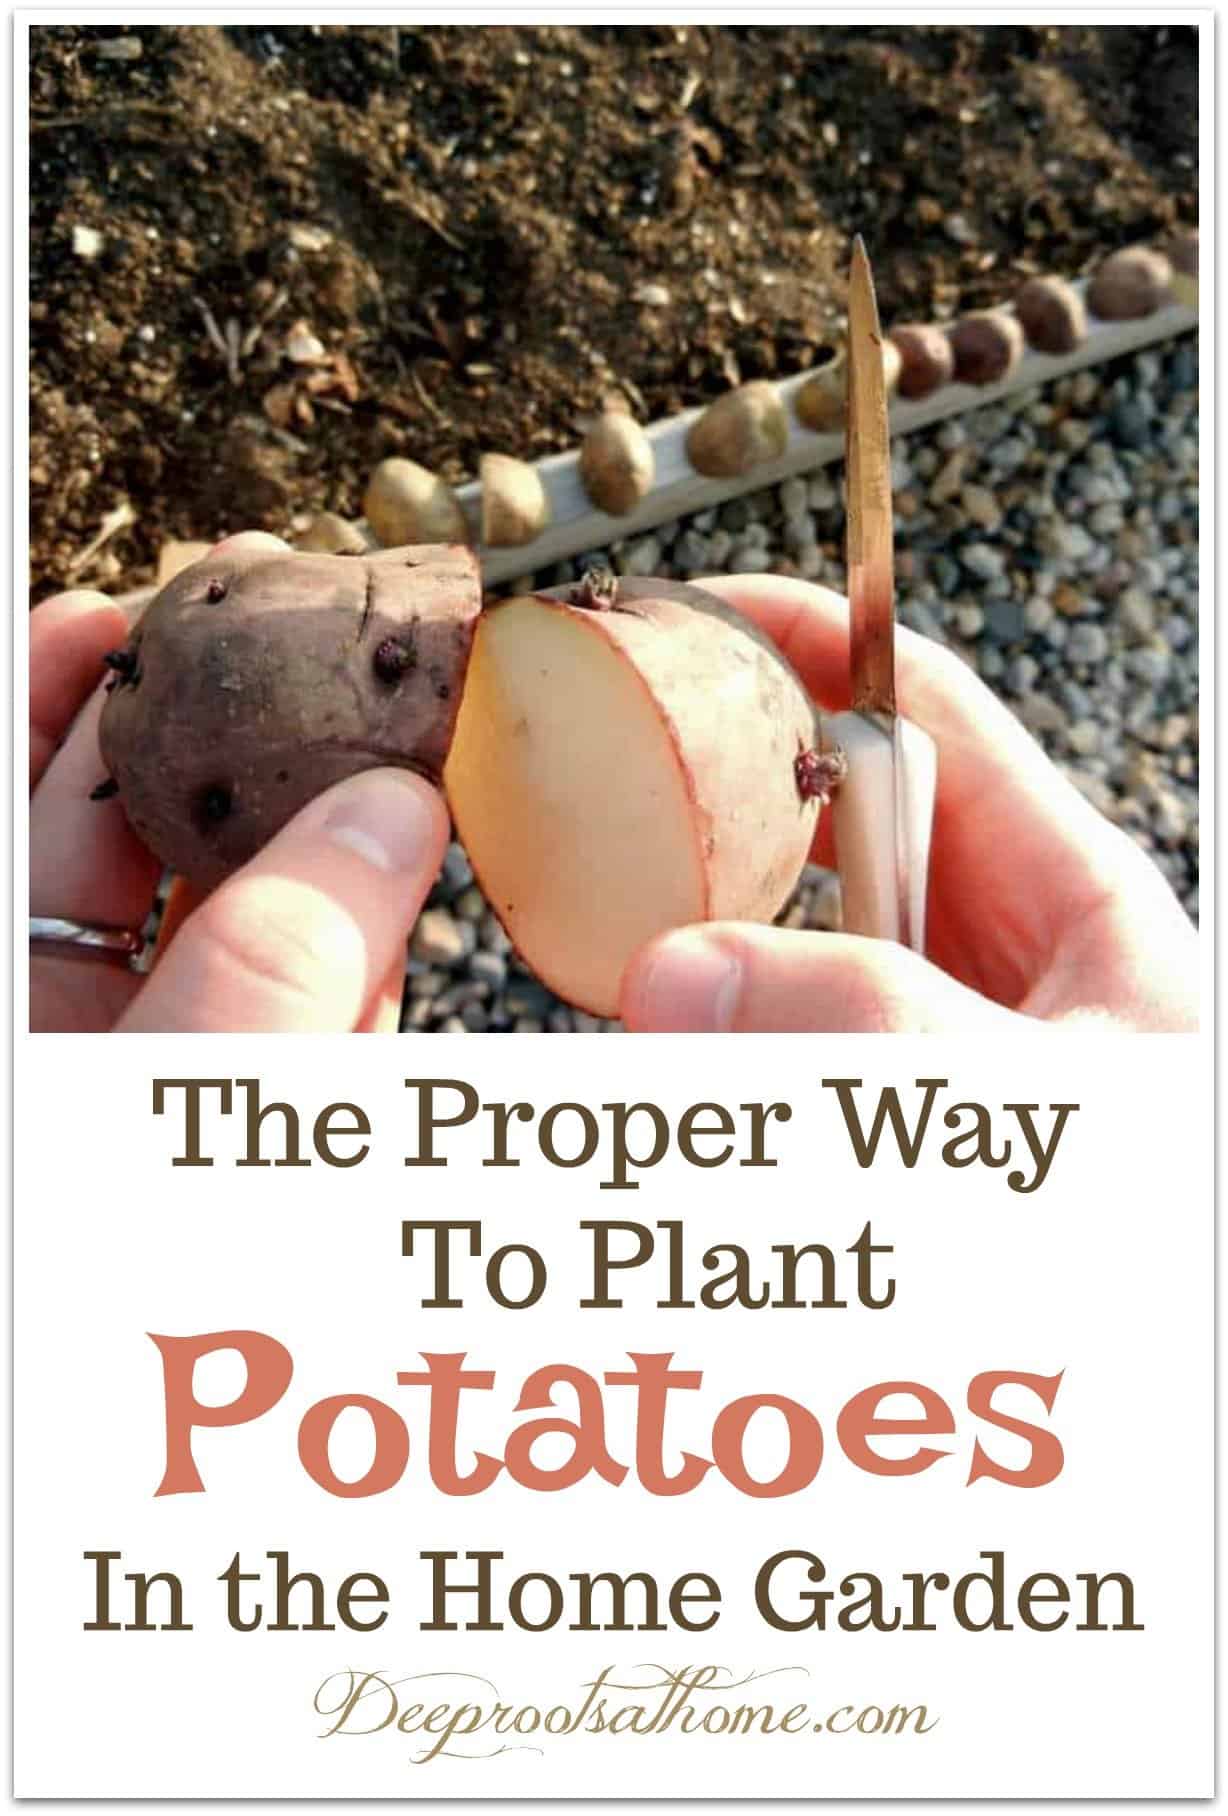 The Proper Way To Plant Potatoes In the Home Garden. Cutting up sprouting seed potatoes